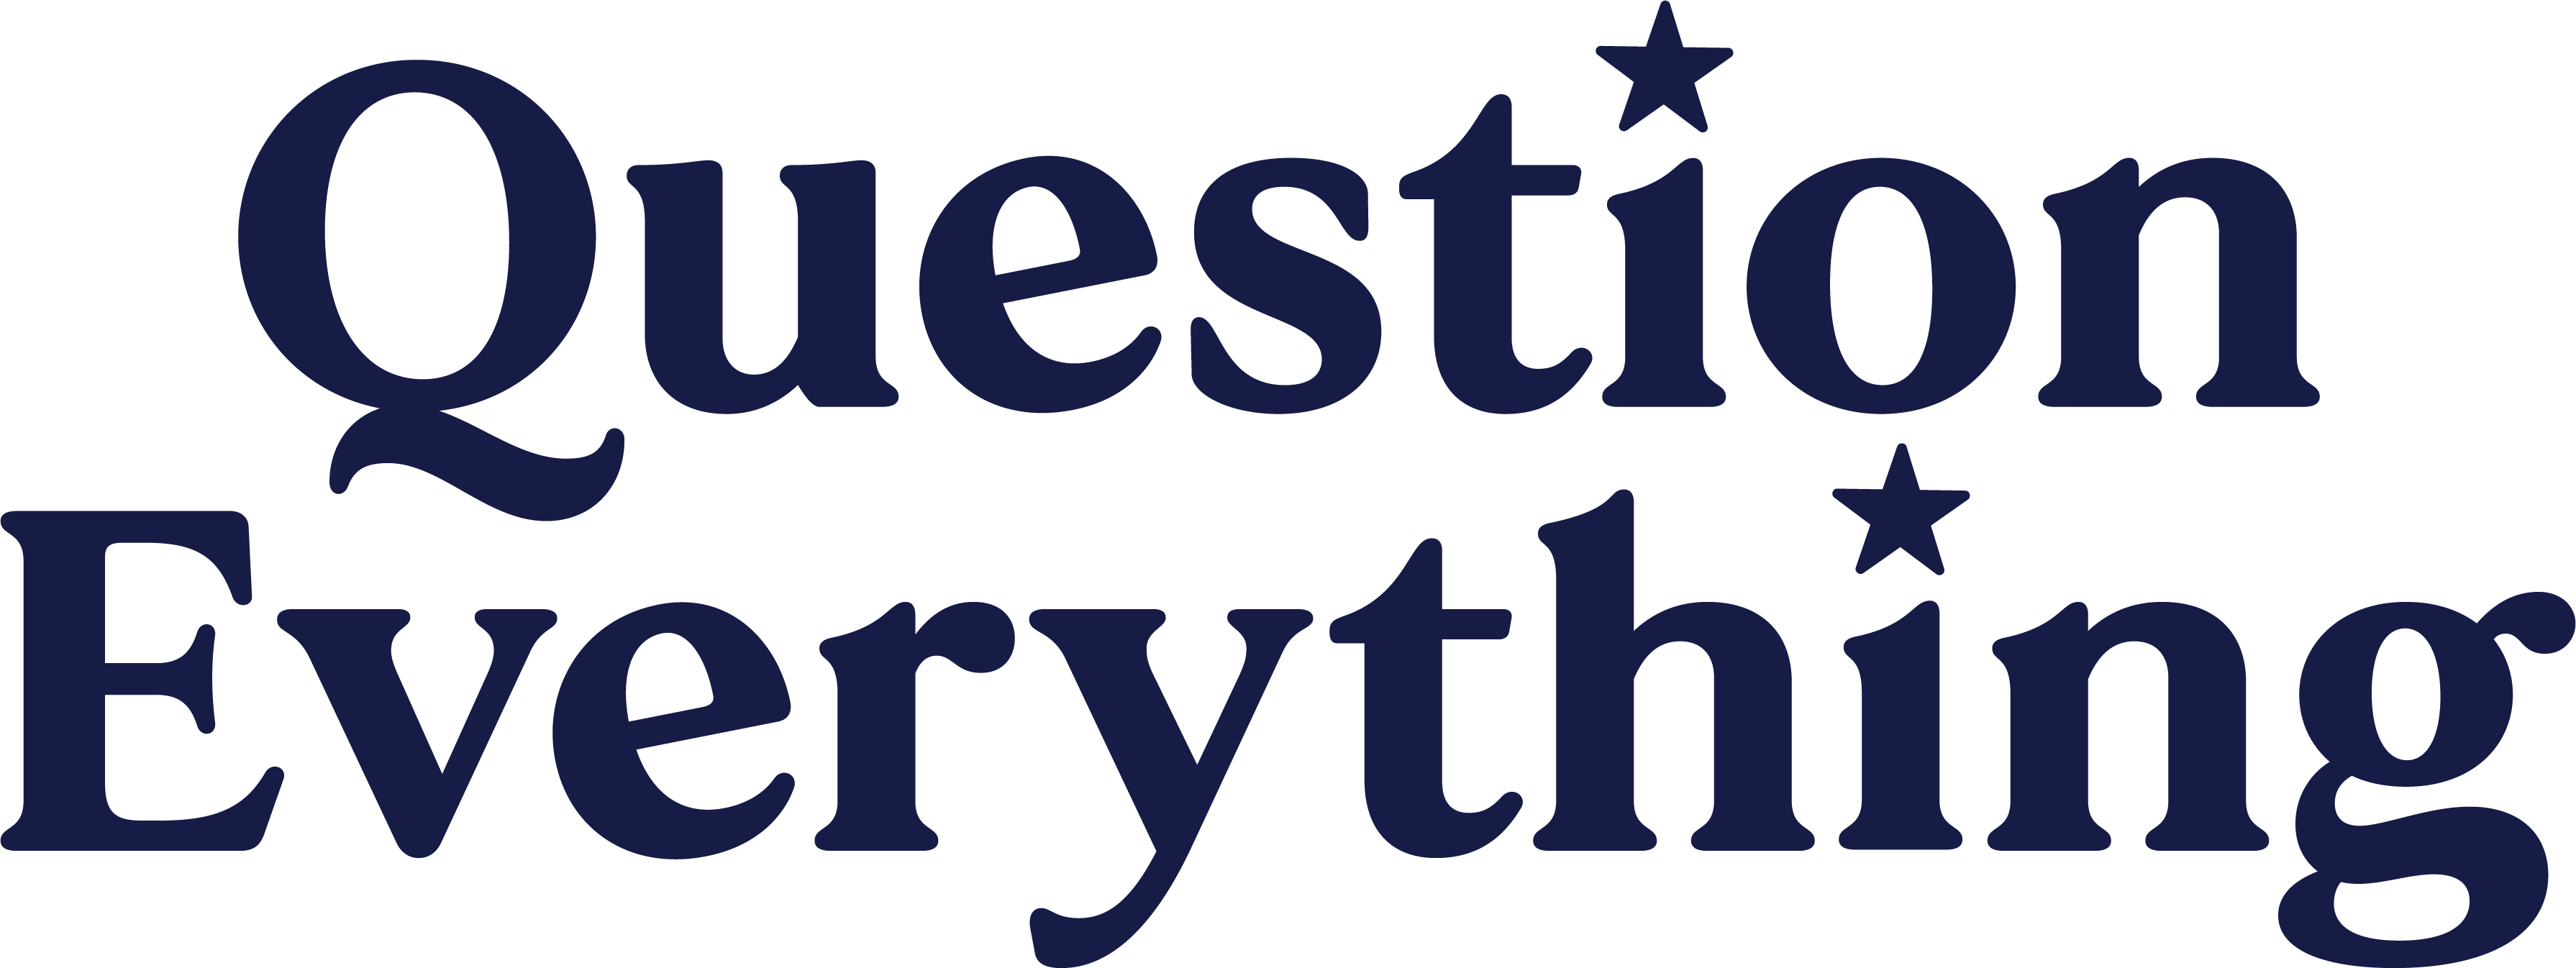 Question Everything logo